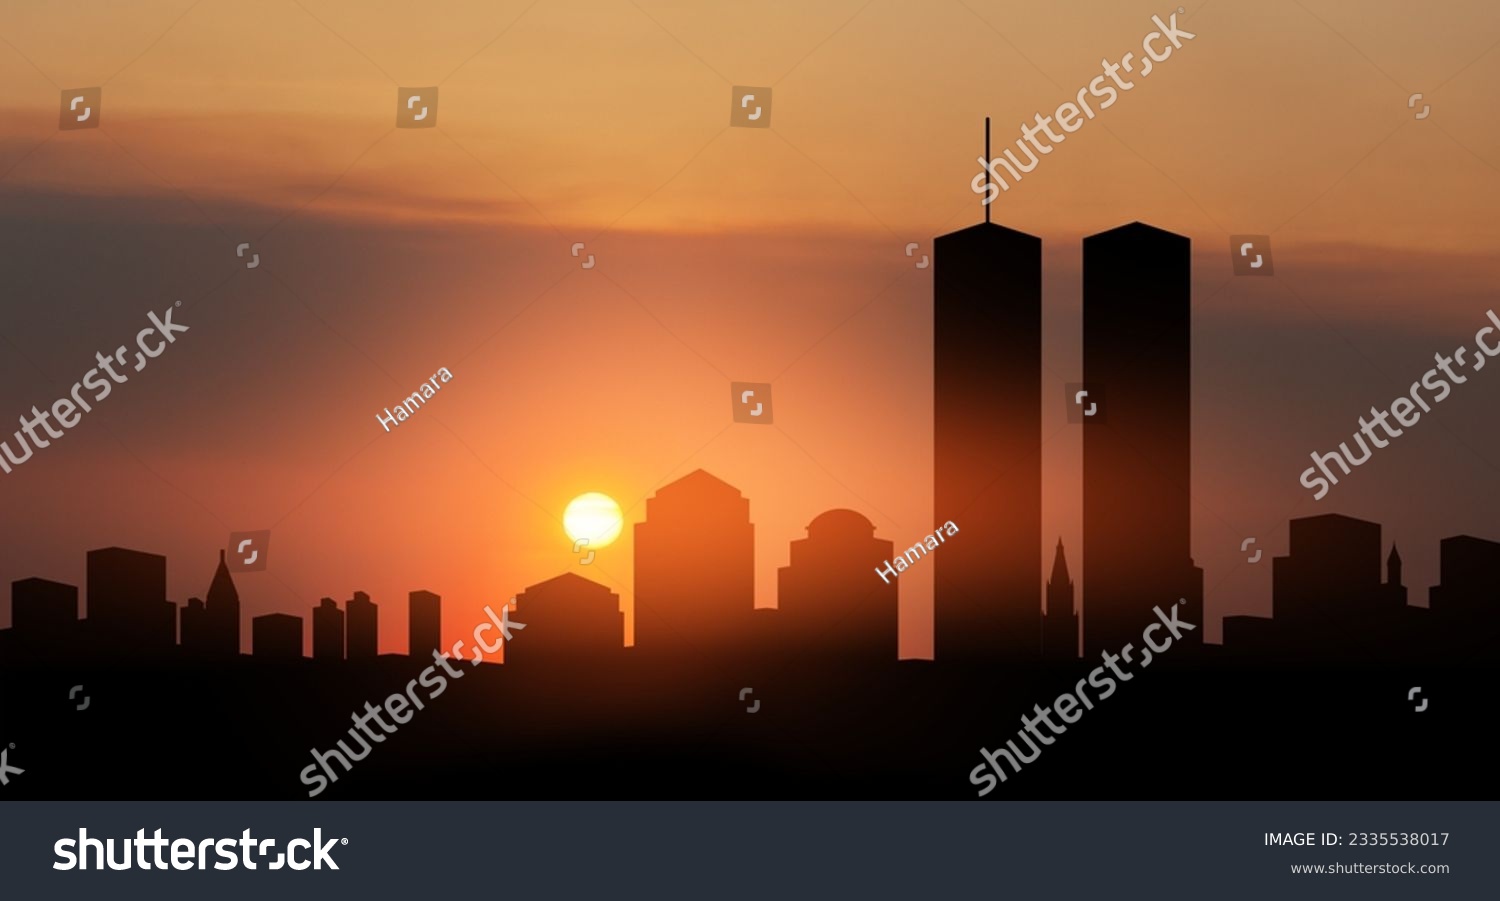 New York skyline silhouette with Twin Towers at sunset. 09.11.2001 American Patriot Day banner. #2335538017